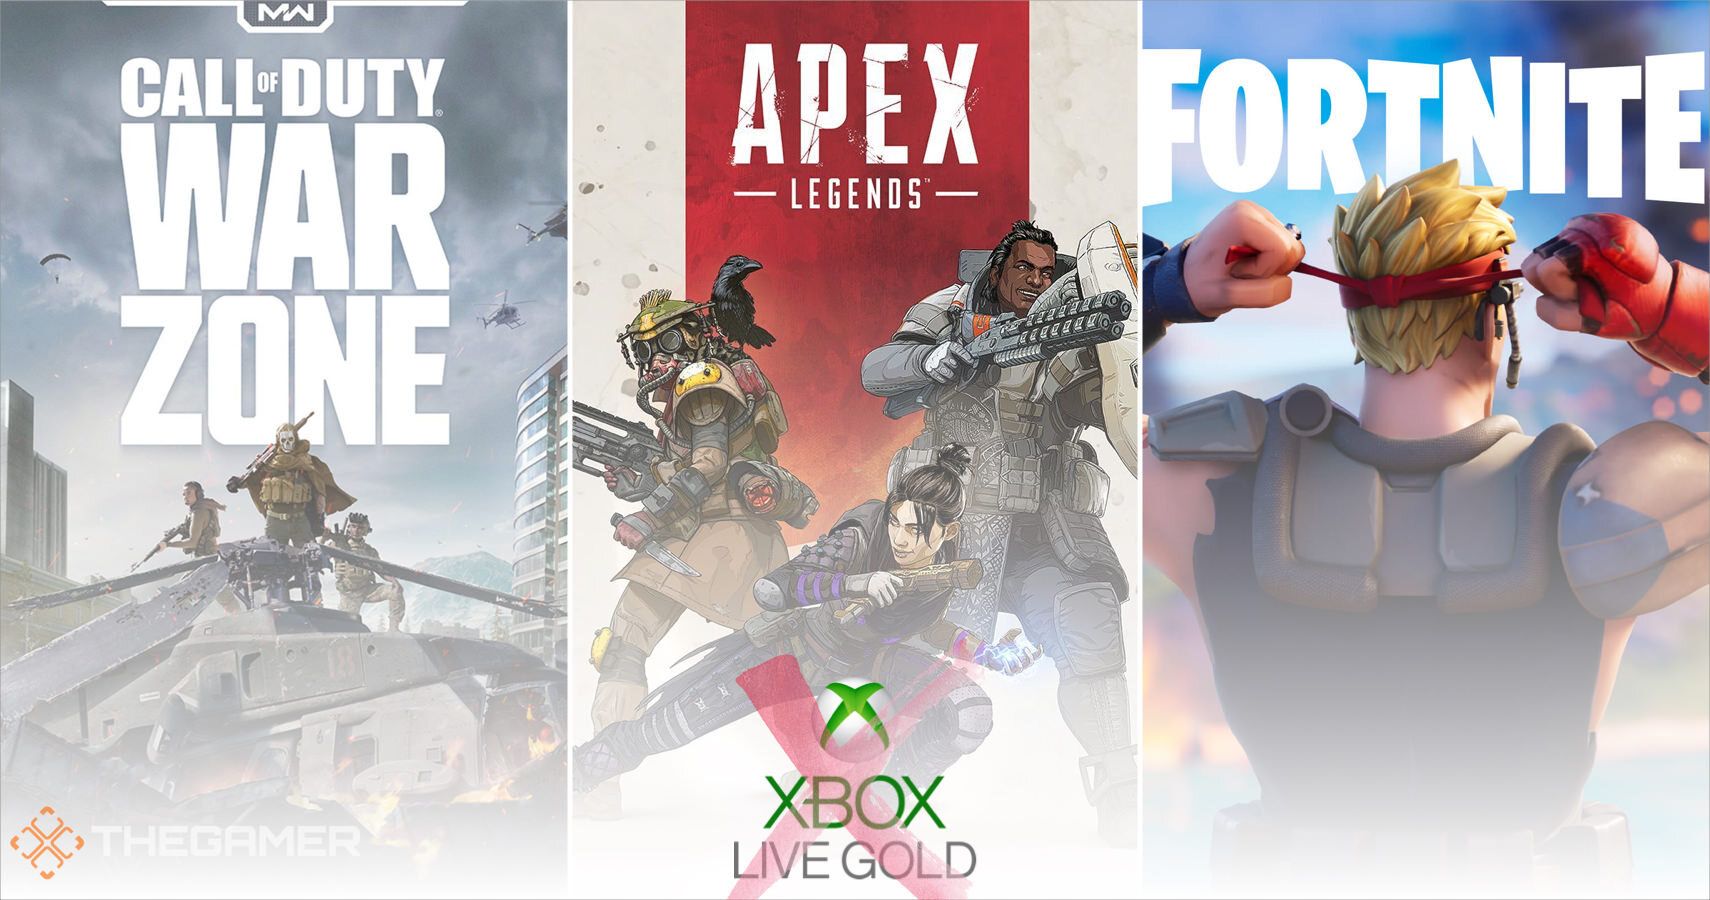 Free-To-Play Games No Longer Need Xbox Live Gold As Of Today